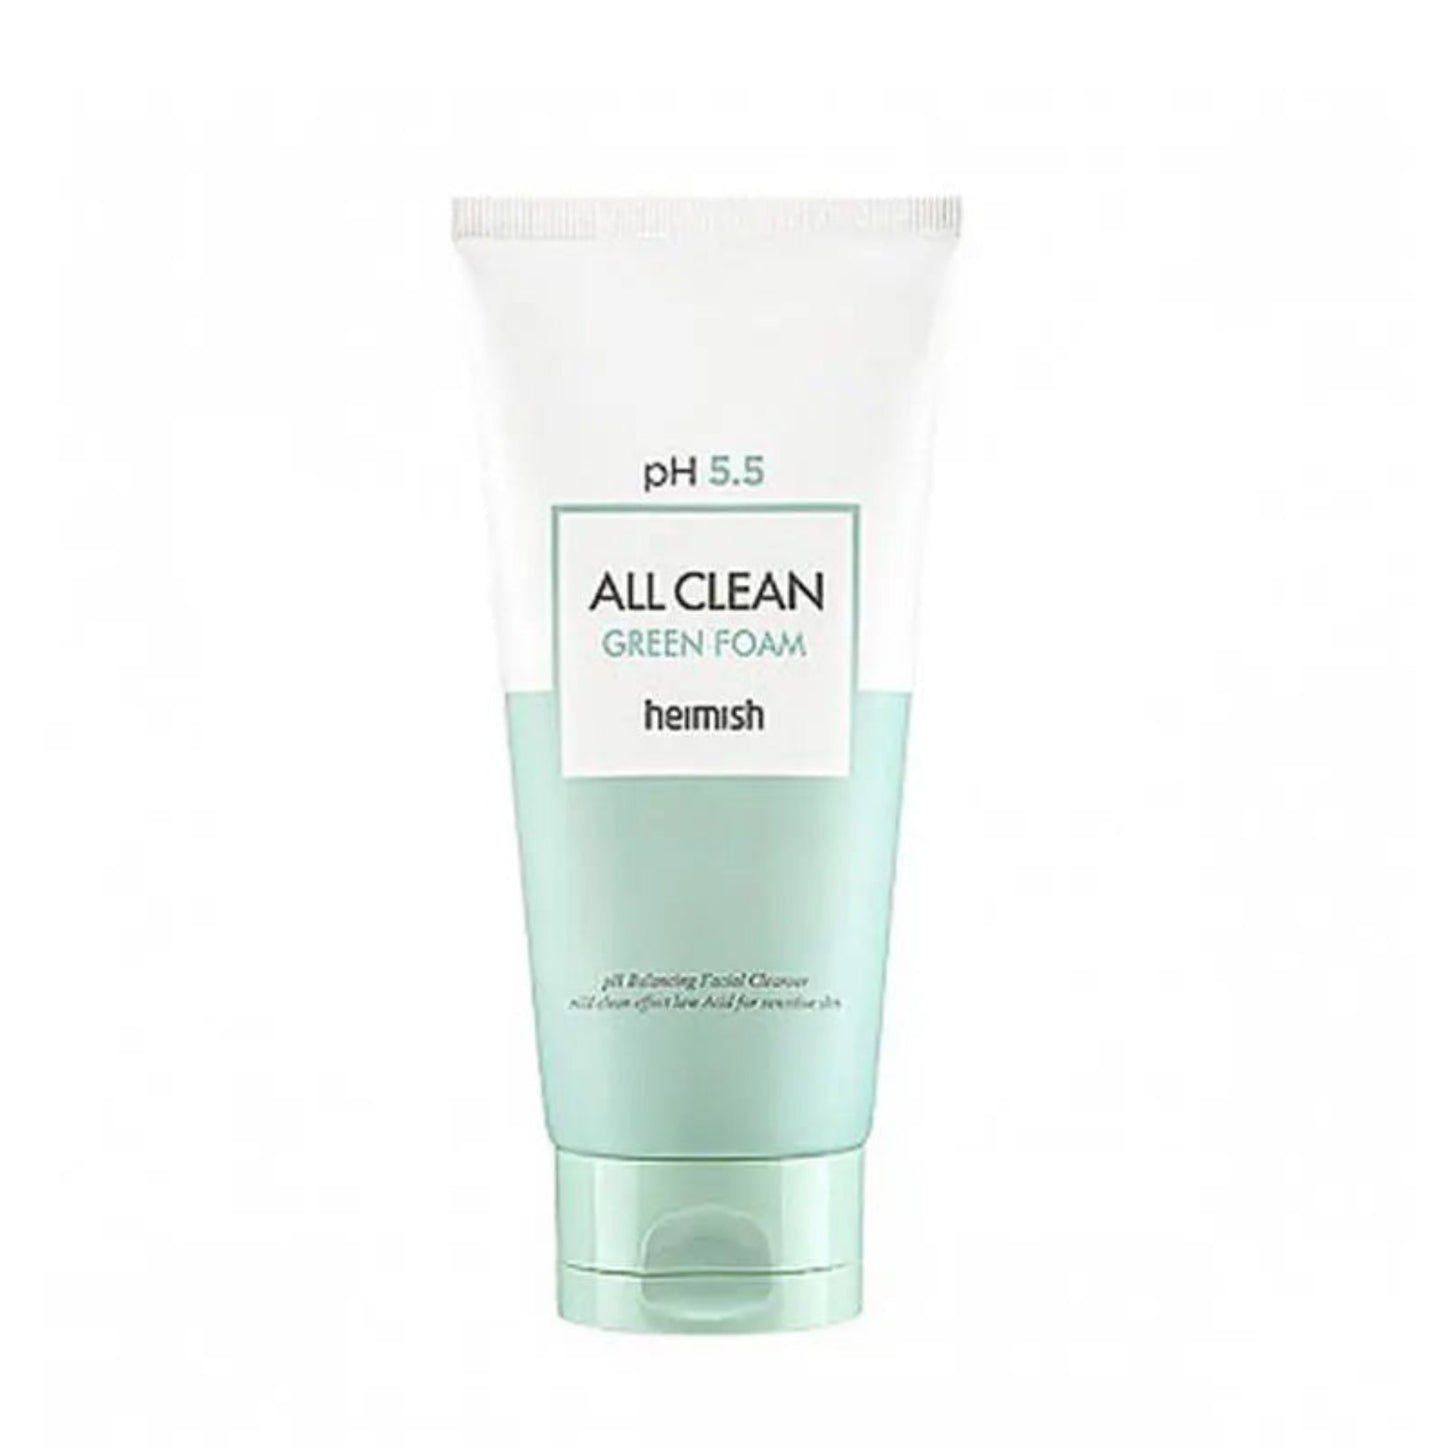 Heimish All Clean Green Foam Cleaner is vegan and cruelty-free cleanser also offers lightweight moisture for healthy, nourished skin.